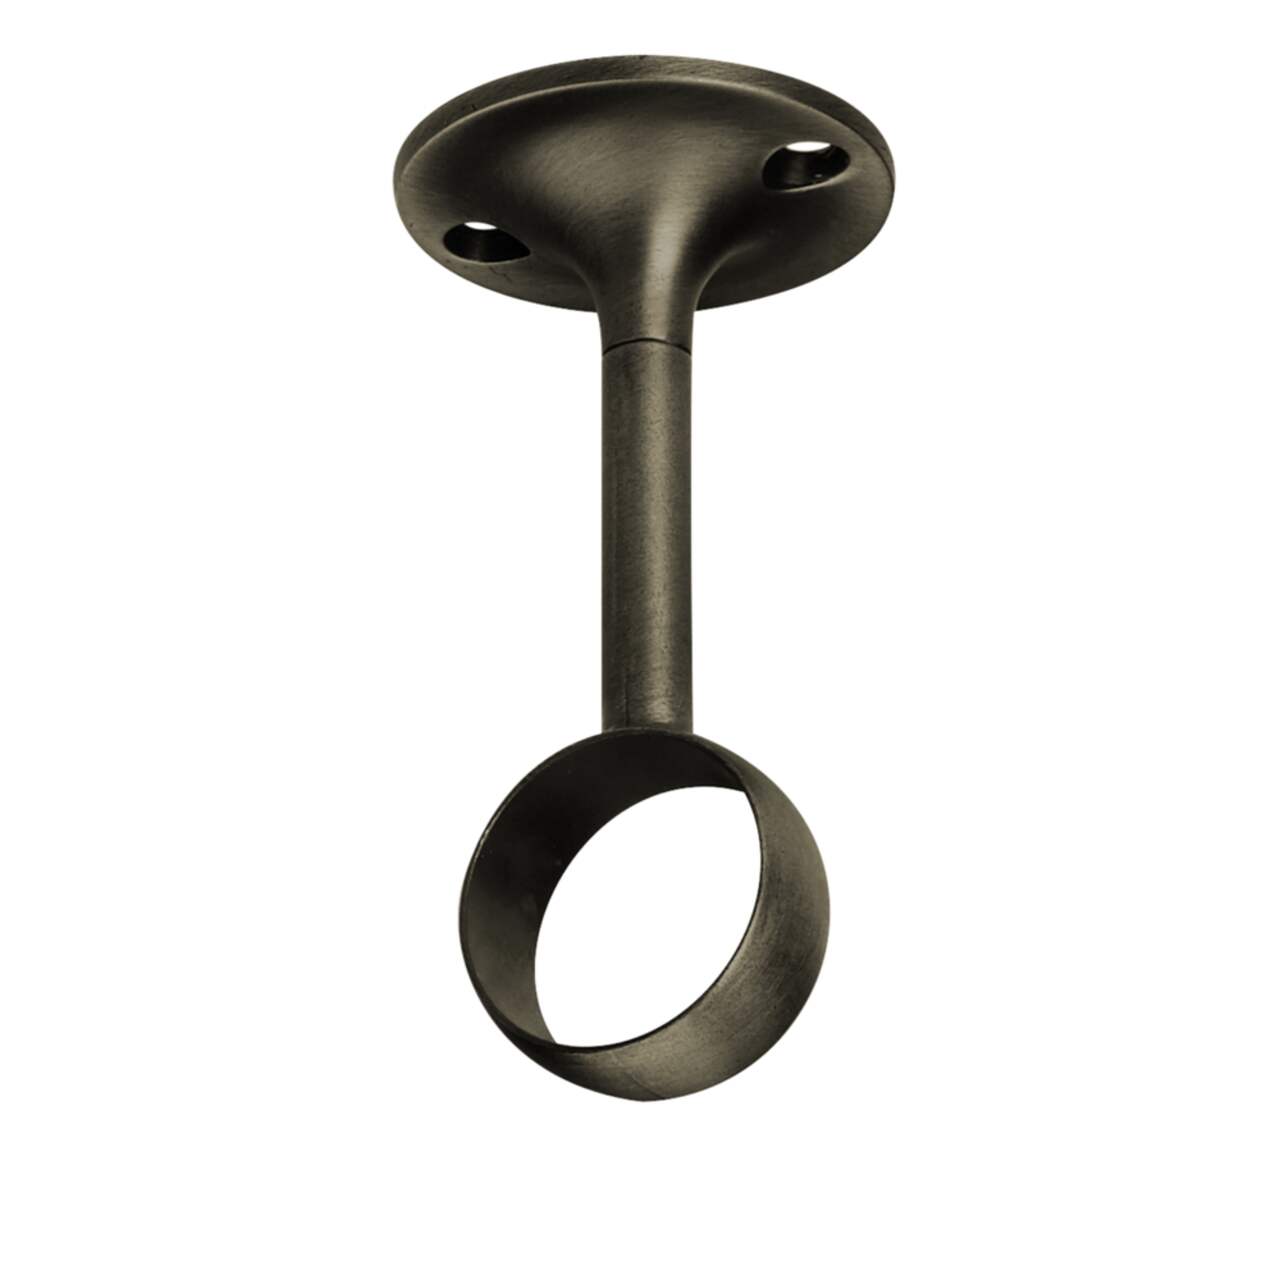 https://media-www.canadiantire.ca/product/living/home-decor/floor-window-decor/0467353/ceiling-mount-bracket-nickel-32d5003f-2fe1-4669-b579-af9a5e3239ac.png?imdensity=1&imwidth=640&impolicy=mZoom